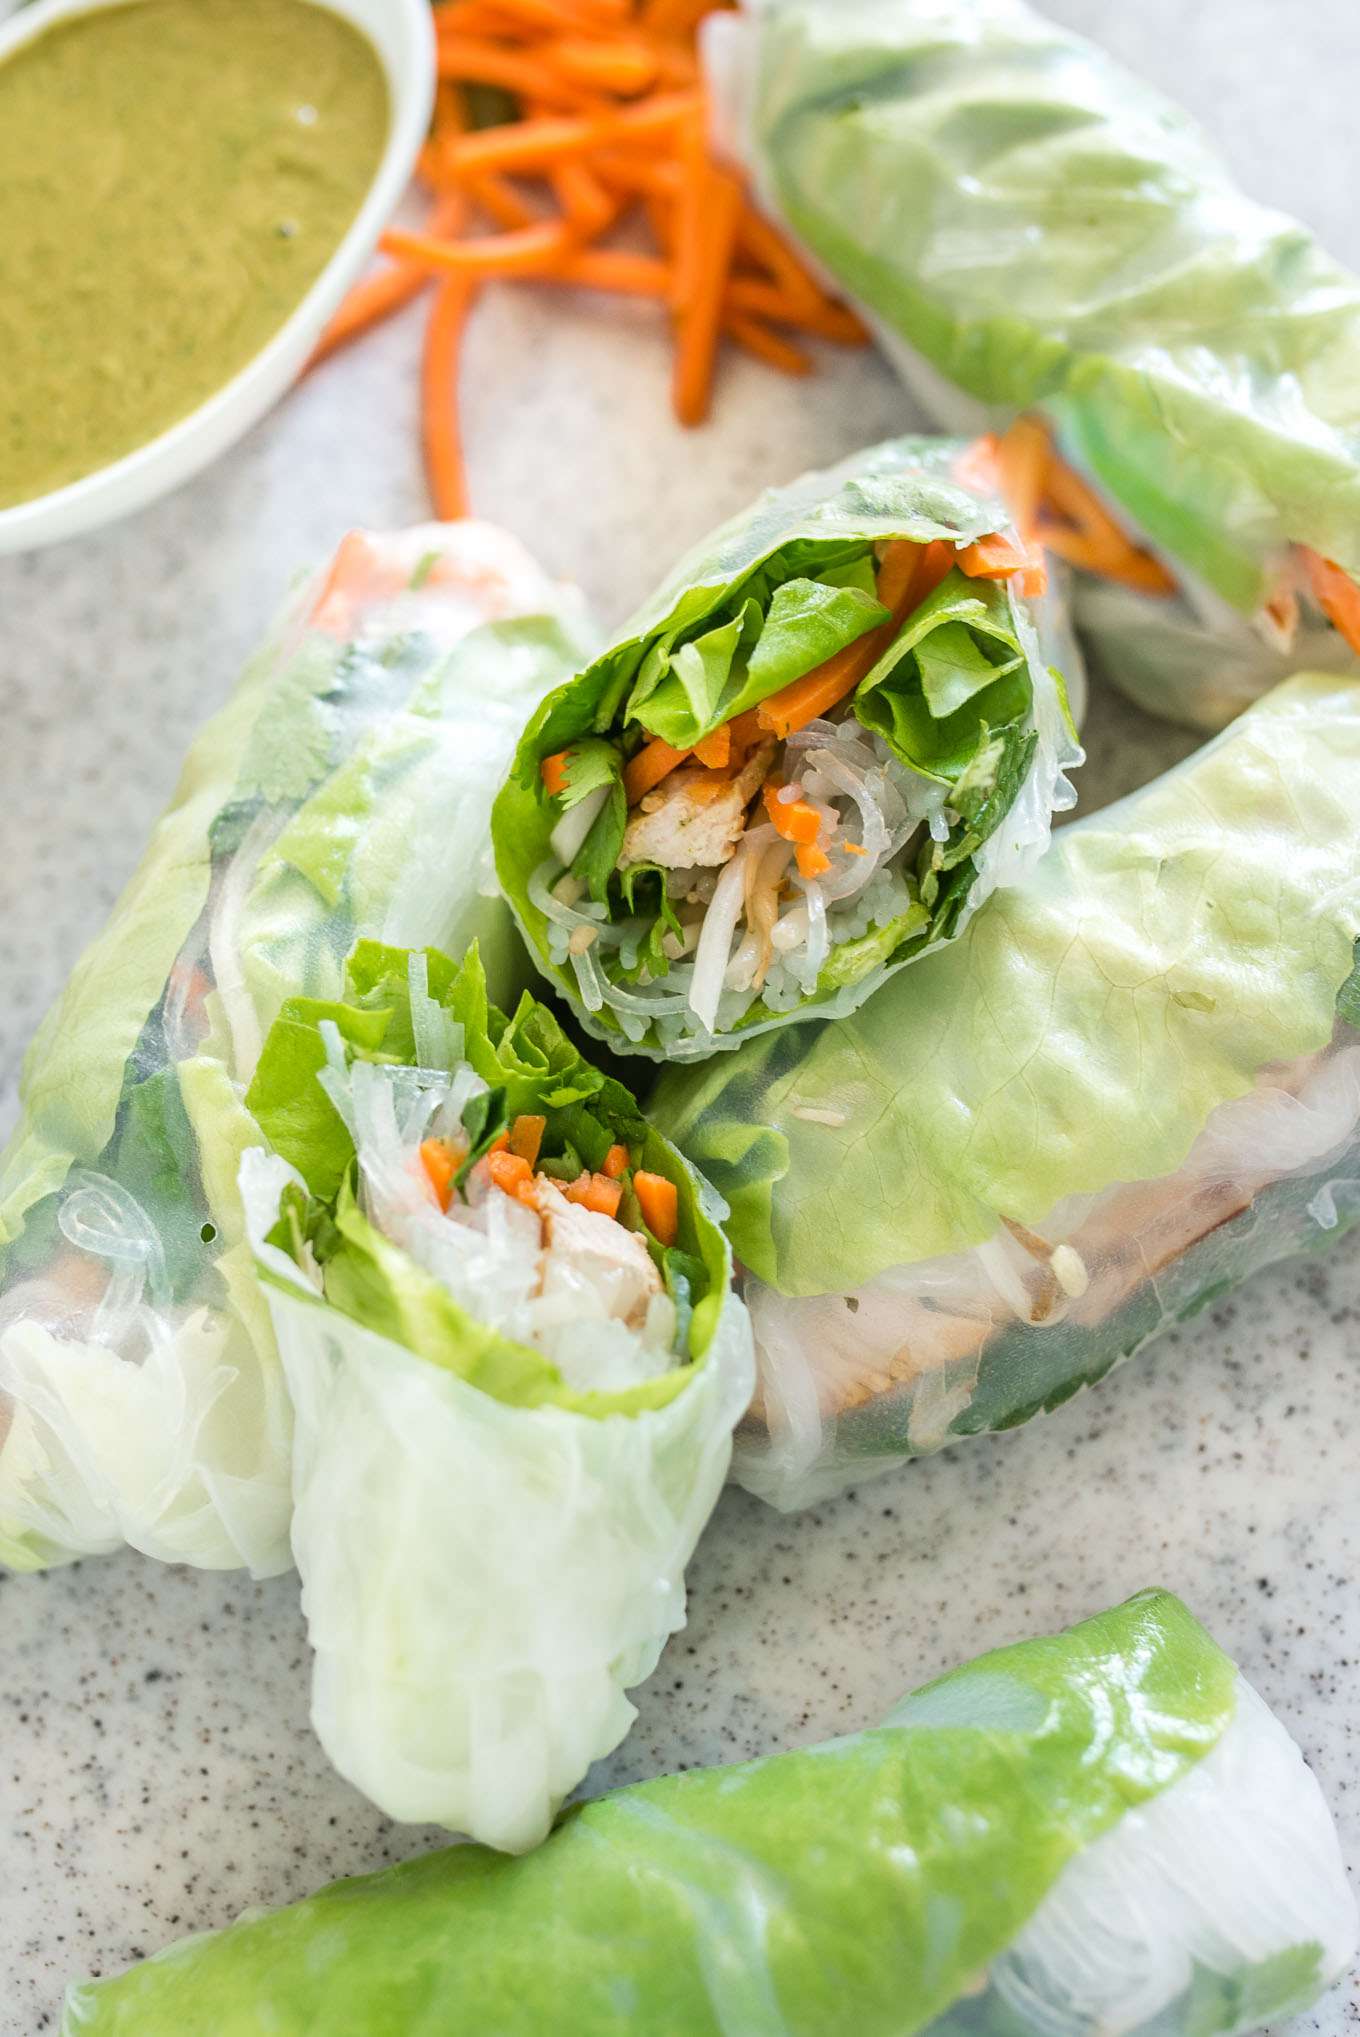 Turkey Summer Rolls with Cilantro Peanut Dipping Sauce are like a salad meets juicy grilled strips of turkey rolled up into one fresh and healthy roll.